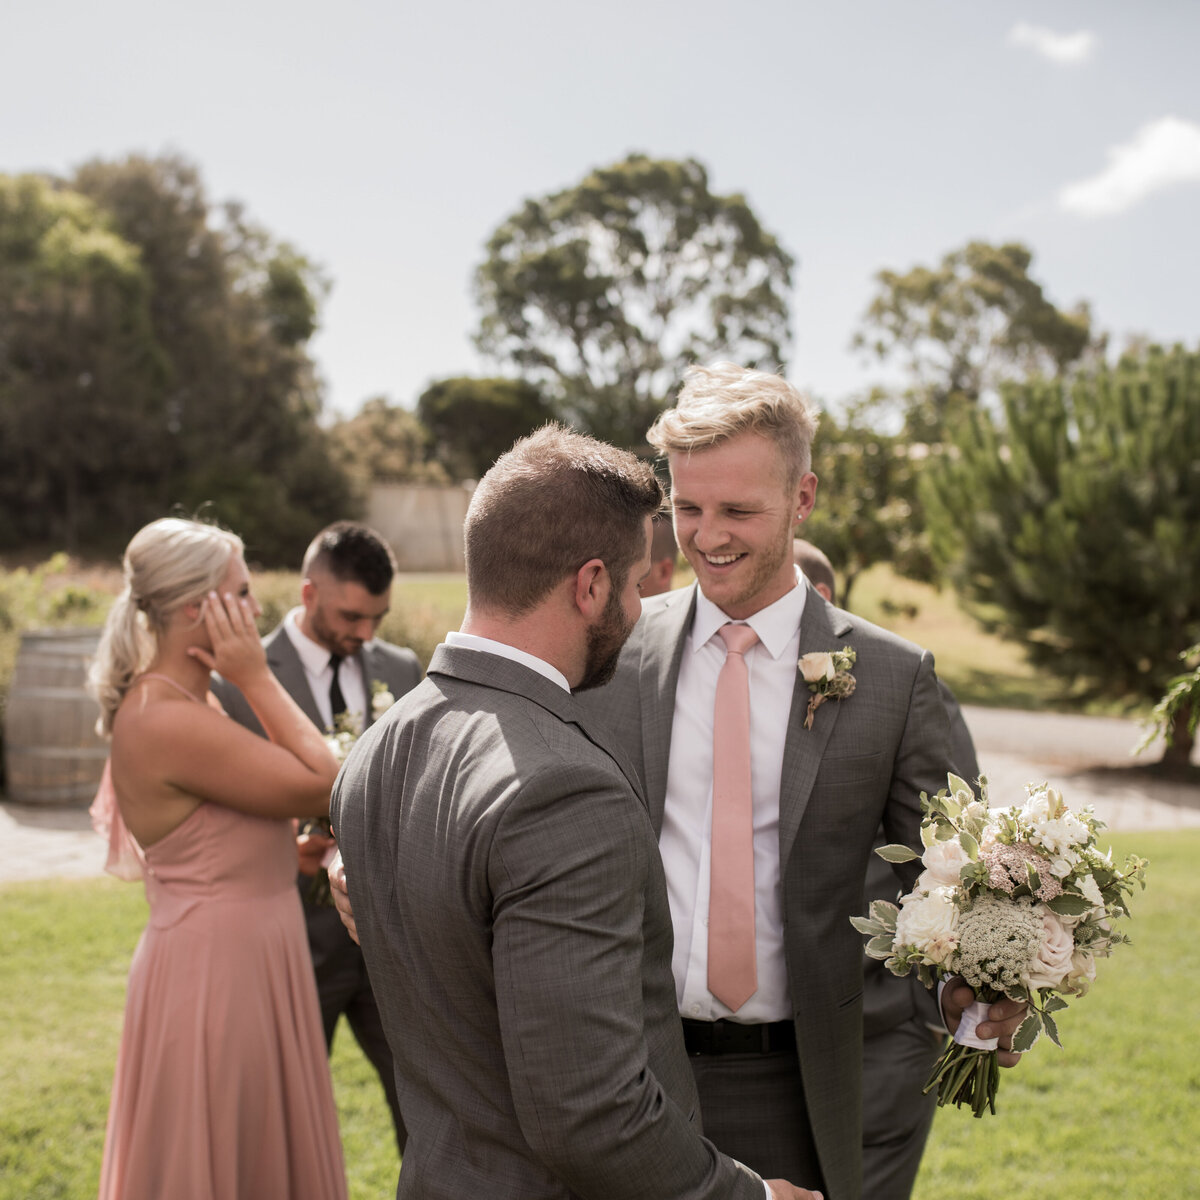 S&T-Paxton-Wines-Rexvil-Photography-Adelaide-Wedding-Photographer-61